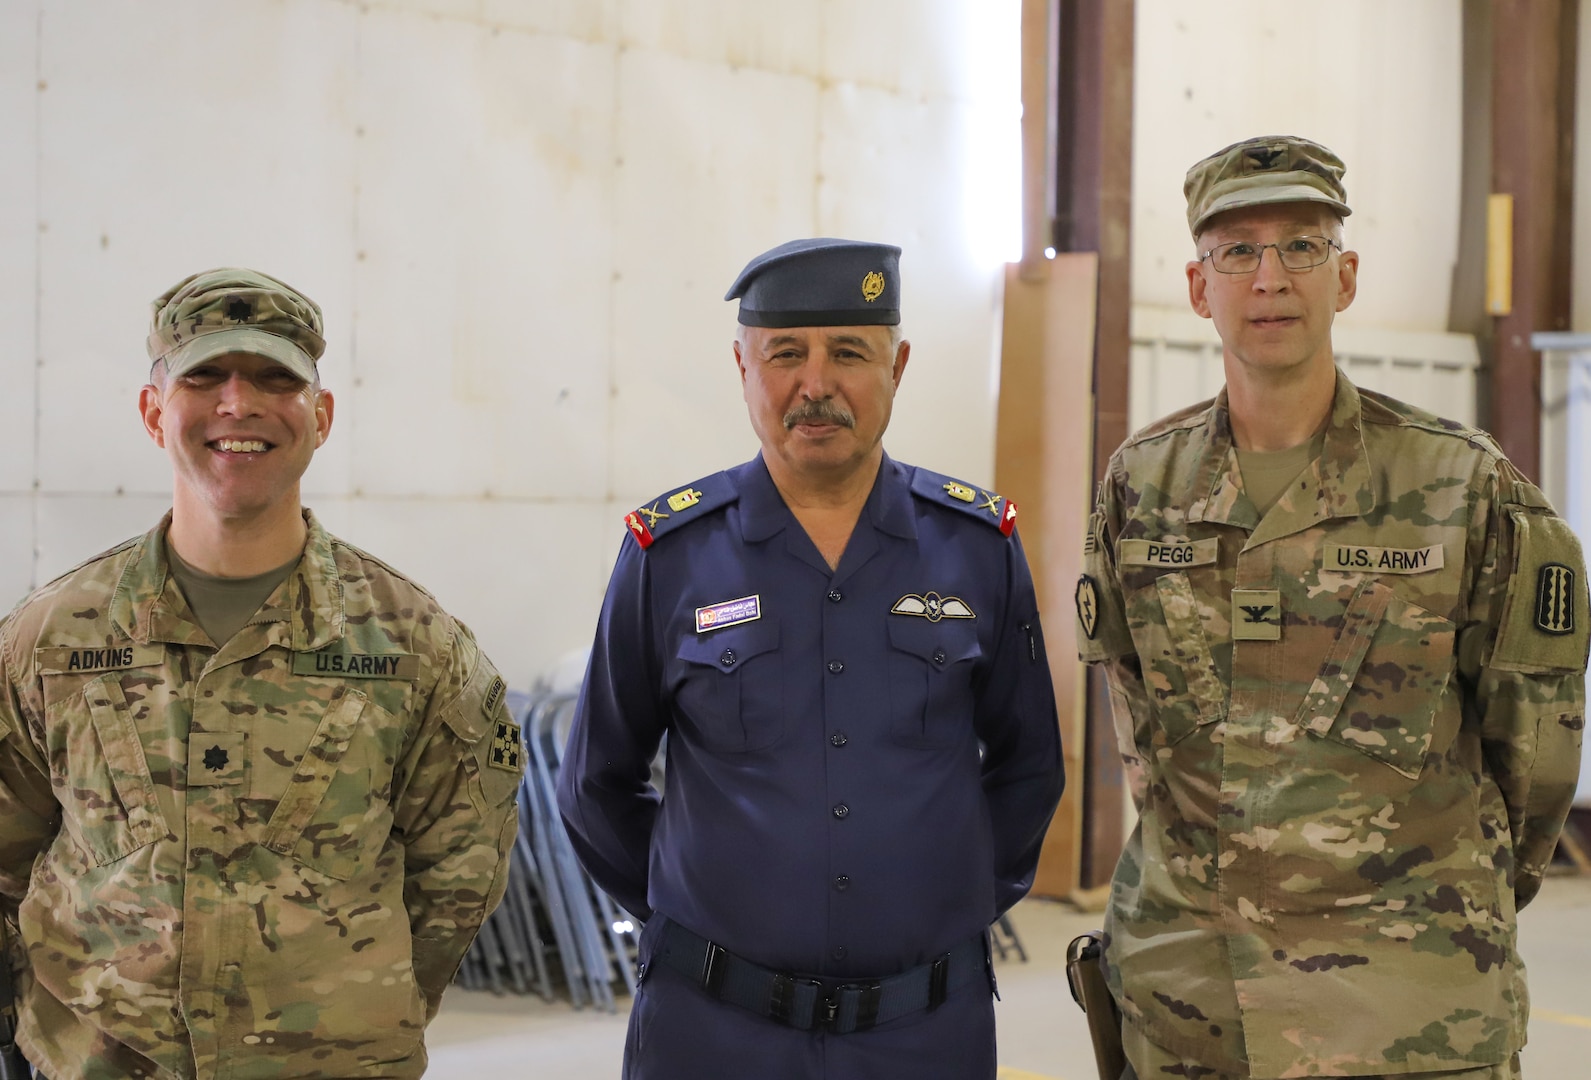 Iraqi Air Force Maj. Gen. Abbas Fadel Damer, Al Asad Air Base commander, stands alongside Lt. Col. Nathan Adkins, 329th Regional Support Group commander, and Col. Todd Pegg, 329th RSG outgoing commander, during a transfer of authority ceremony Nov. 23, 2021, at Al Asad Air Base, Iraq. AAAB, an Iraqi-run installation, conducts operations in support of Combined Joint Task Force-Operation Inherent Resolve, a multi-national coalition charged with advising, assisting and enabling Iraqi partners to maintain the enduring defeat of Daesh. Adkins will oversee support and coordinate efforts between core base functions to enable operations at AAAB, while the unit headquarters will move to Camp Arifjan, Kuwait, in efforts to further the advise, assist, and enable mission of CJTF-OIR. (U.S. Army photo by Maj. Alexa Carlo-Hickman)